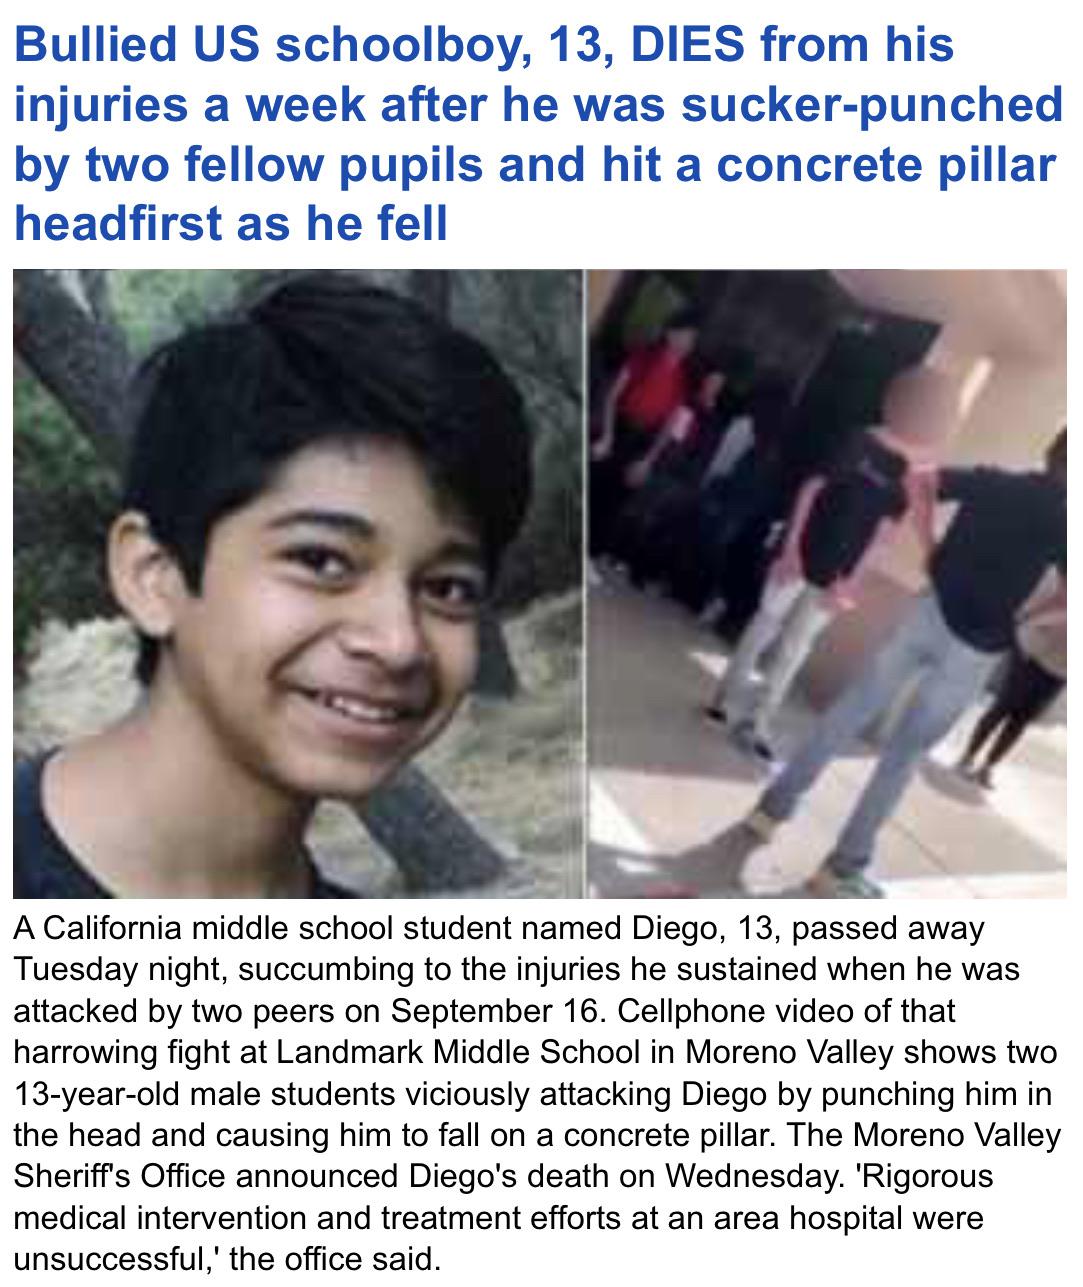 photo caption - Bullied Us schoolboy, 13, Dies from his injuries a week after he was suckerpunched by two fellow pupils and hit a concrete pillar headfirst as he fell A California middle school student named Diego, 13, passed away Tuesday night, succumbin